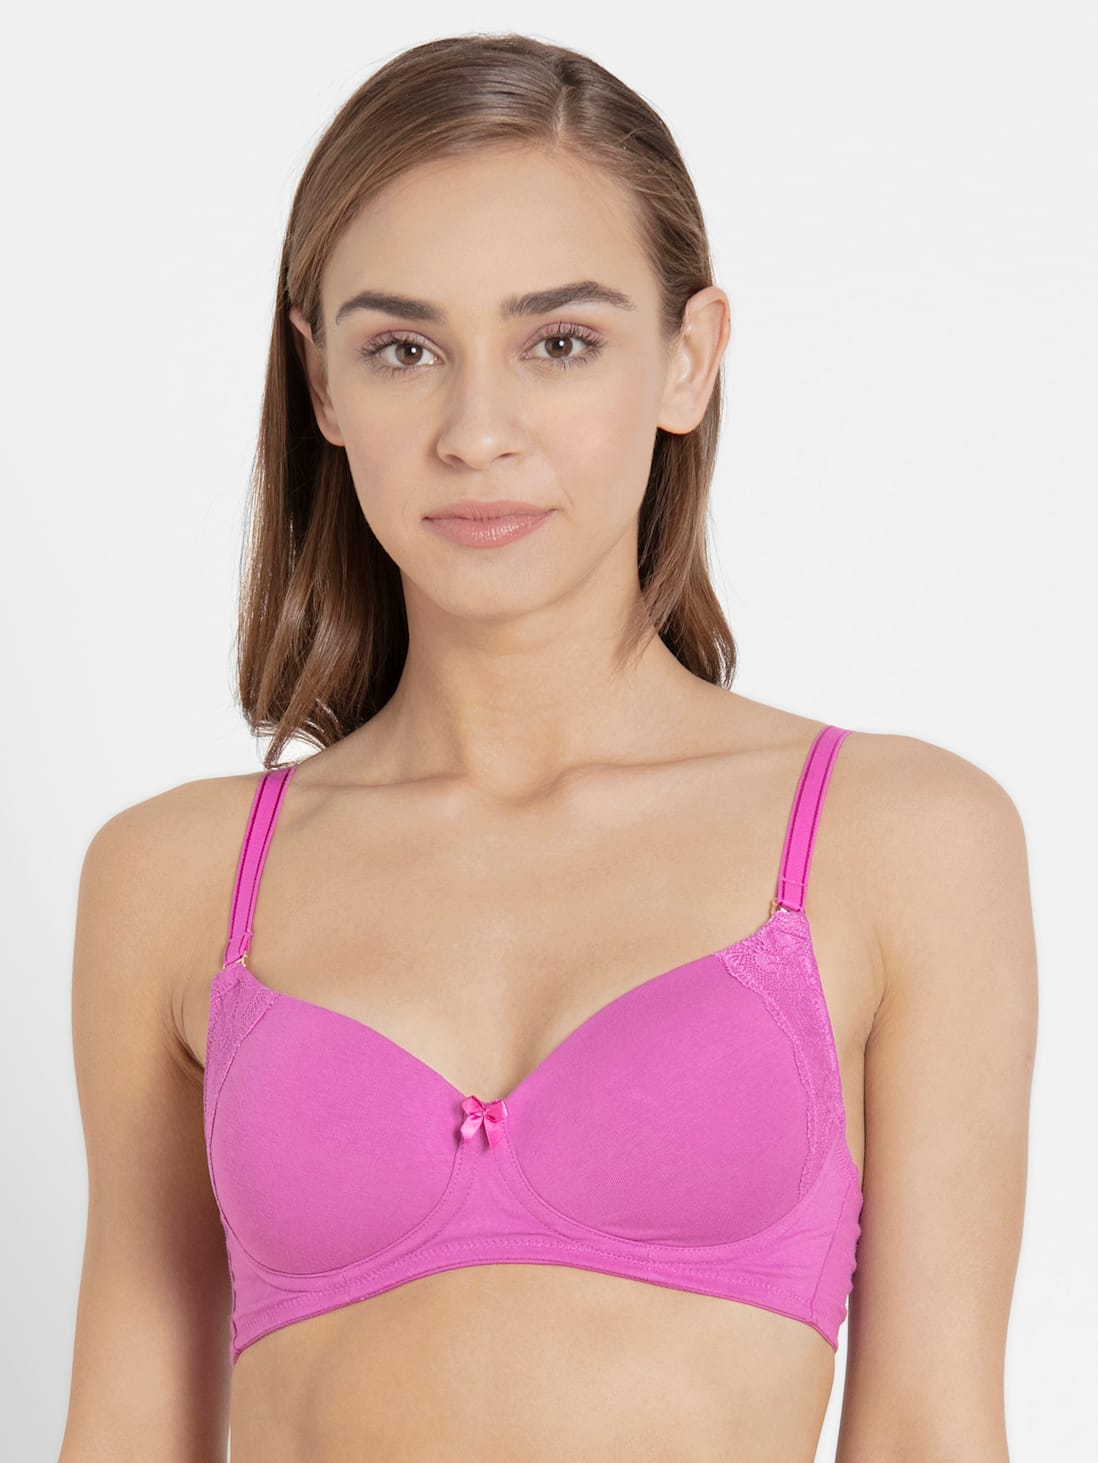 https://static05.jockey.in/c_scale,h_1463,w_1098/jockey/uploads/dealimages/9326/originalimages/lavender-scent-non-wired-full-coverage-t-shirt-bra-fe34-14.jpg